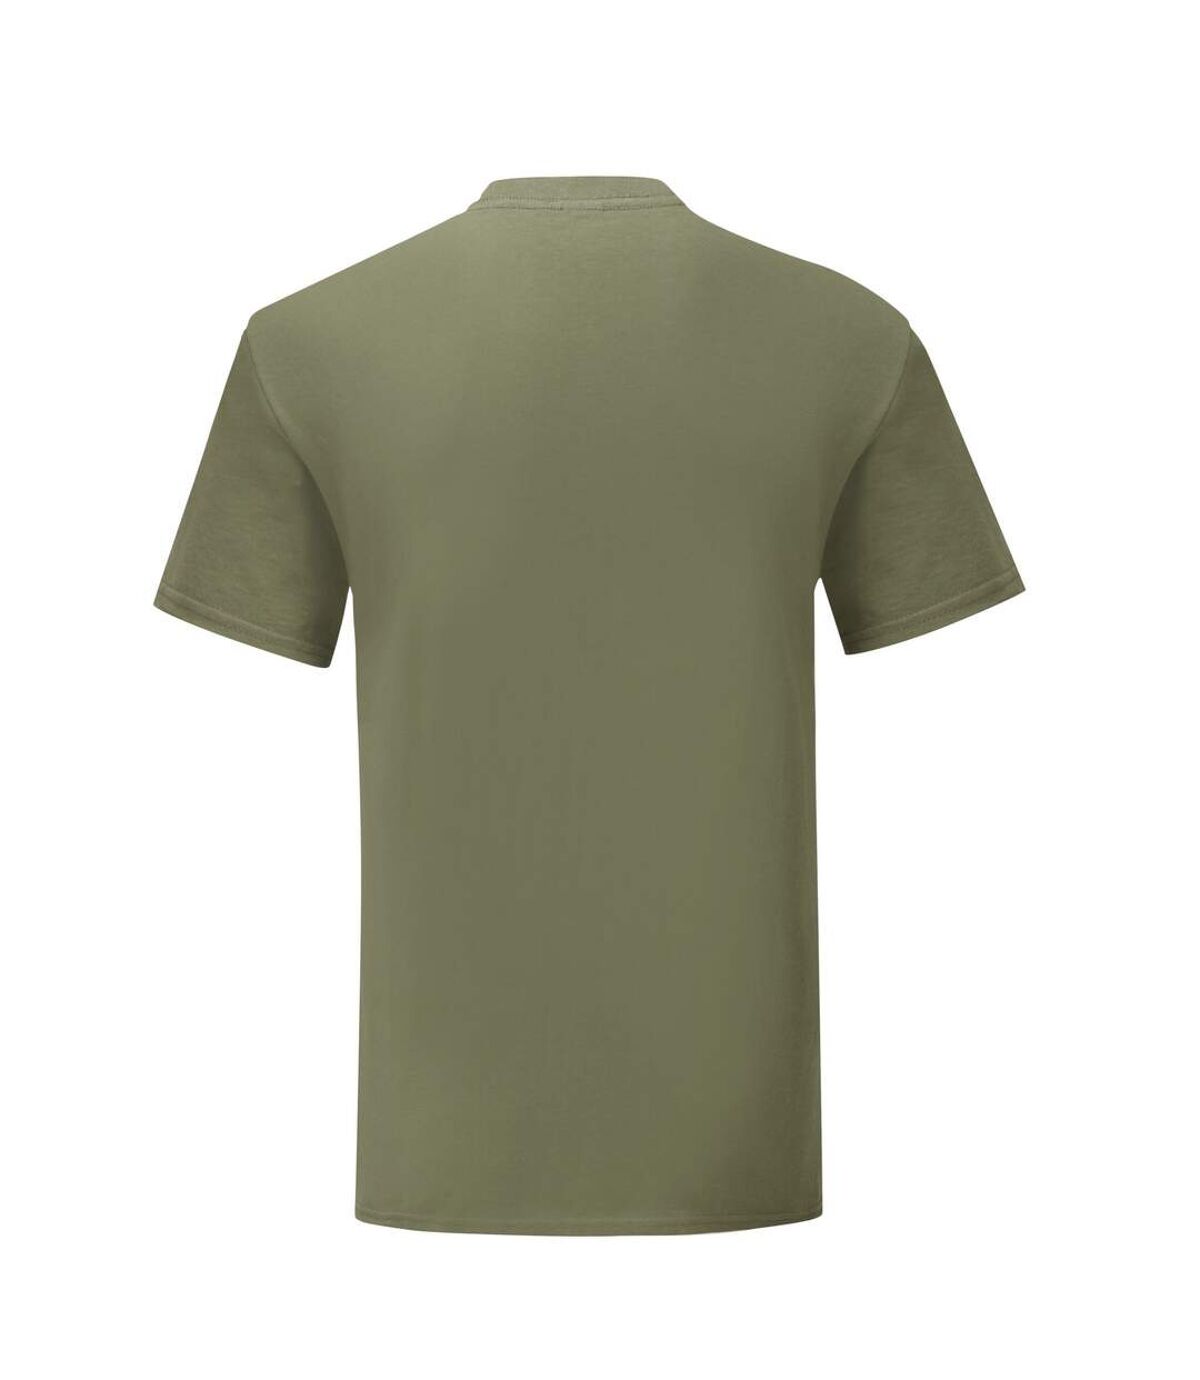 Fruit of the Loom Mens Iconic Premium Ringspun Cotton T-Shirt (Classic Olive)